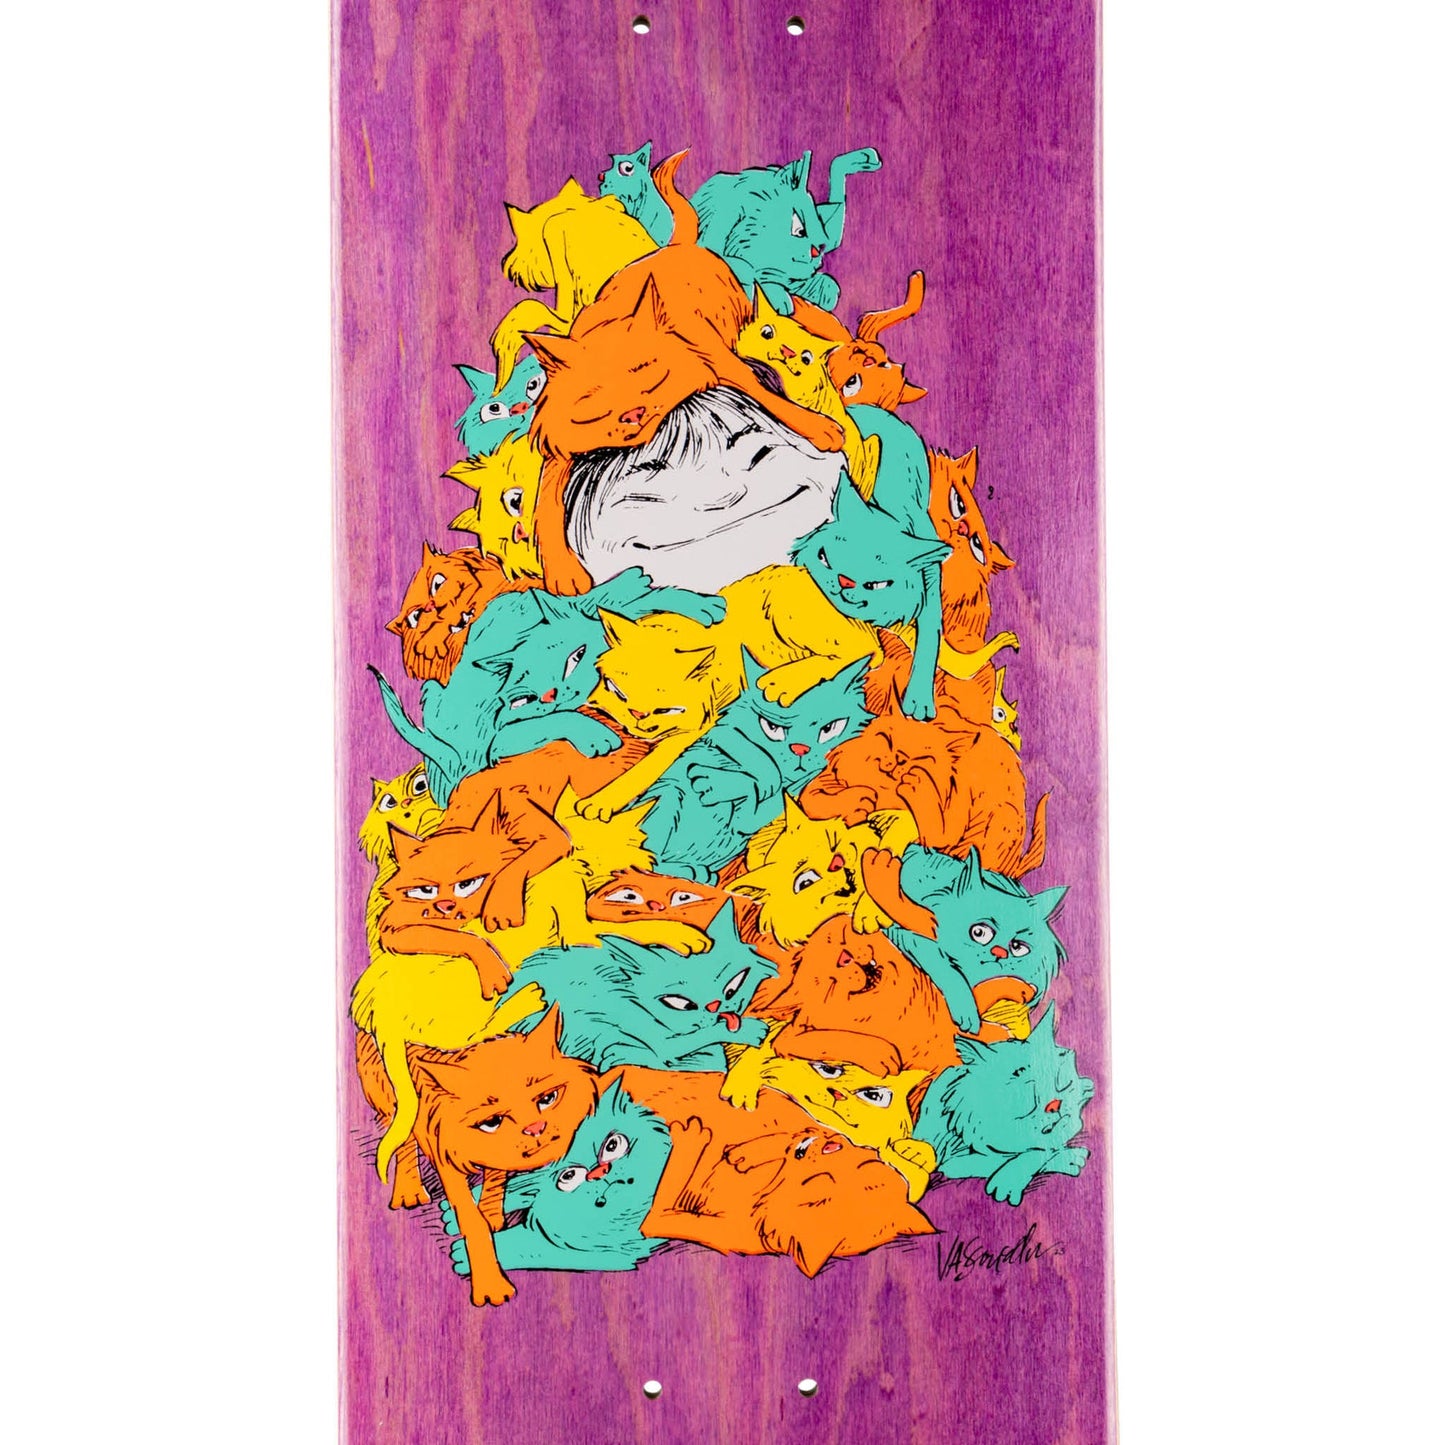 Welcome Nora Vasconcellos Purr Pile on Popsicle Purple Stain Skateboard Deck - 8.25"